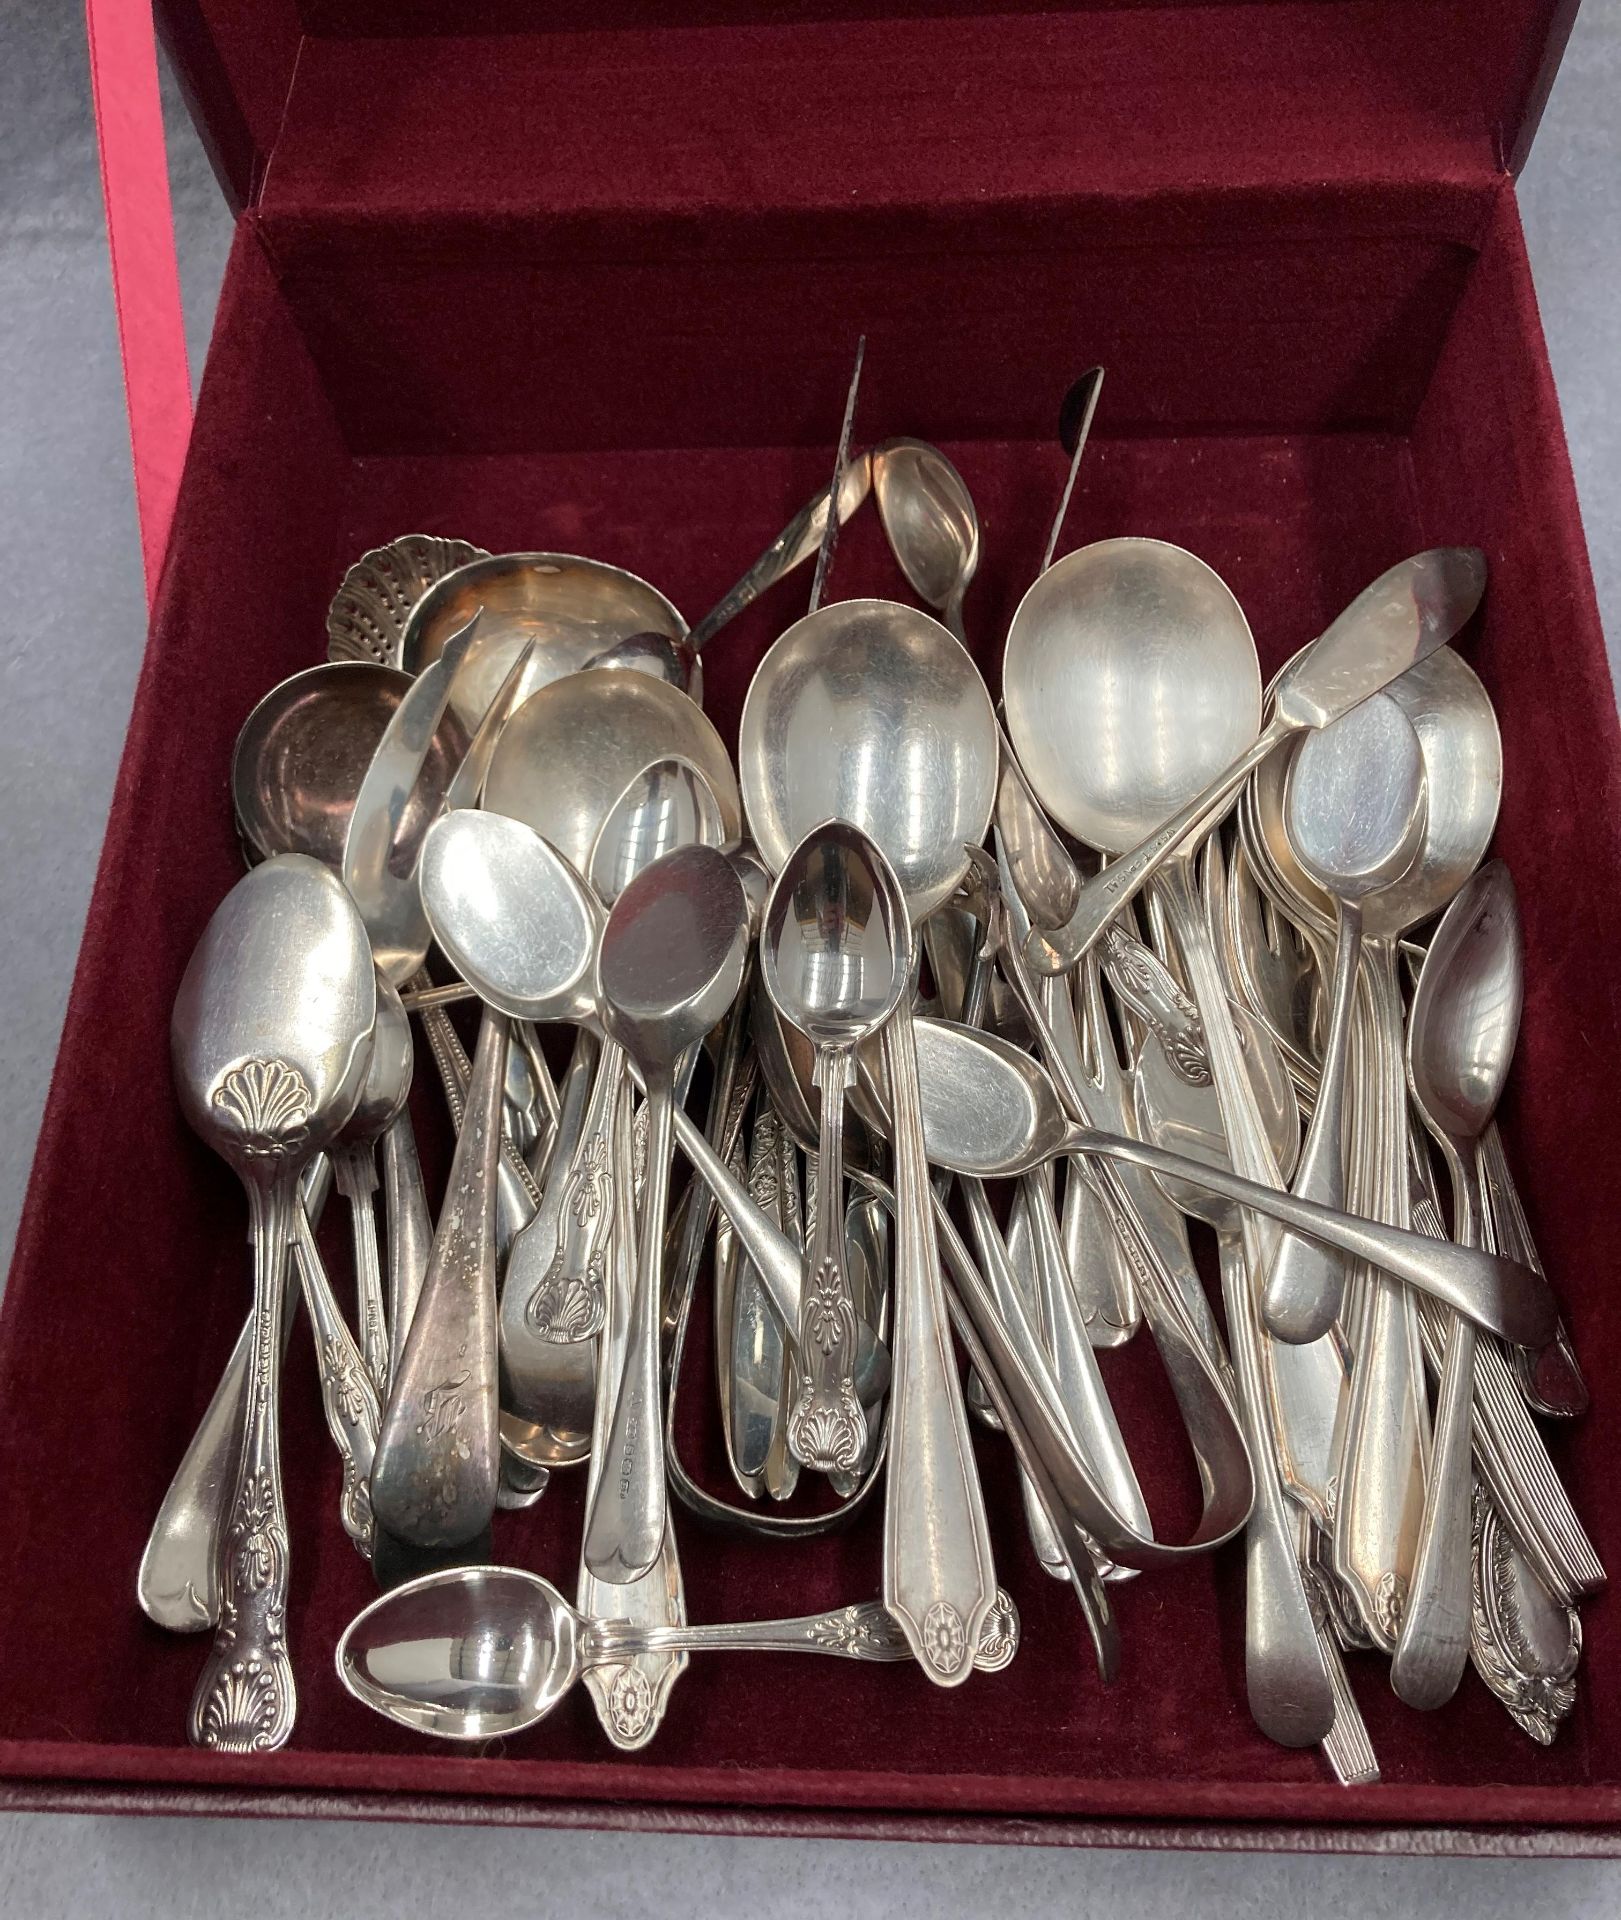 Contents to Chivas Regal box - a quantity of plated cutlery